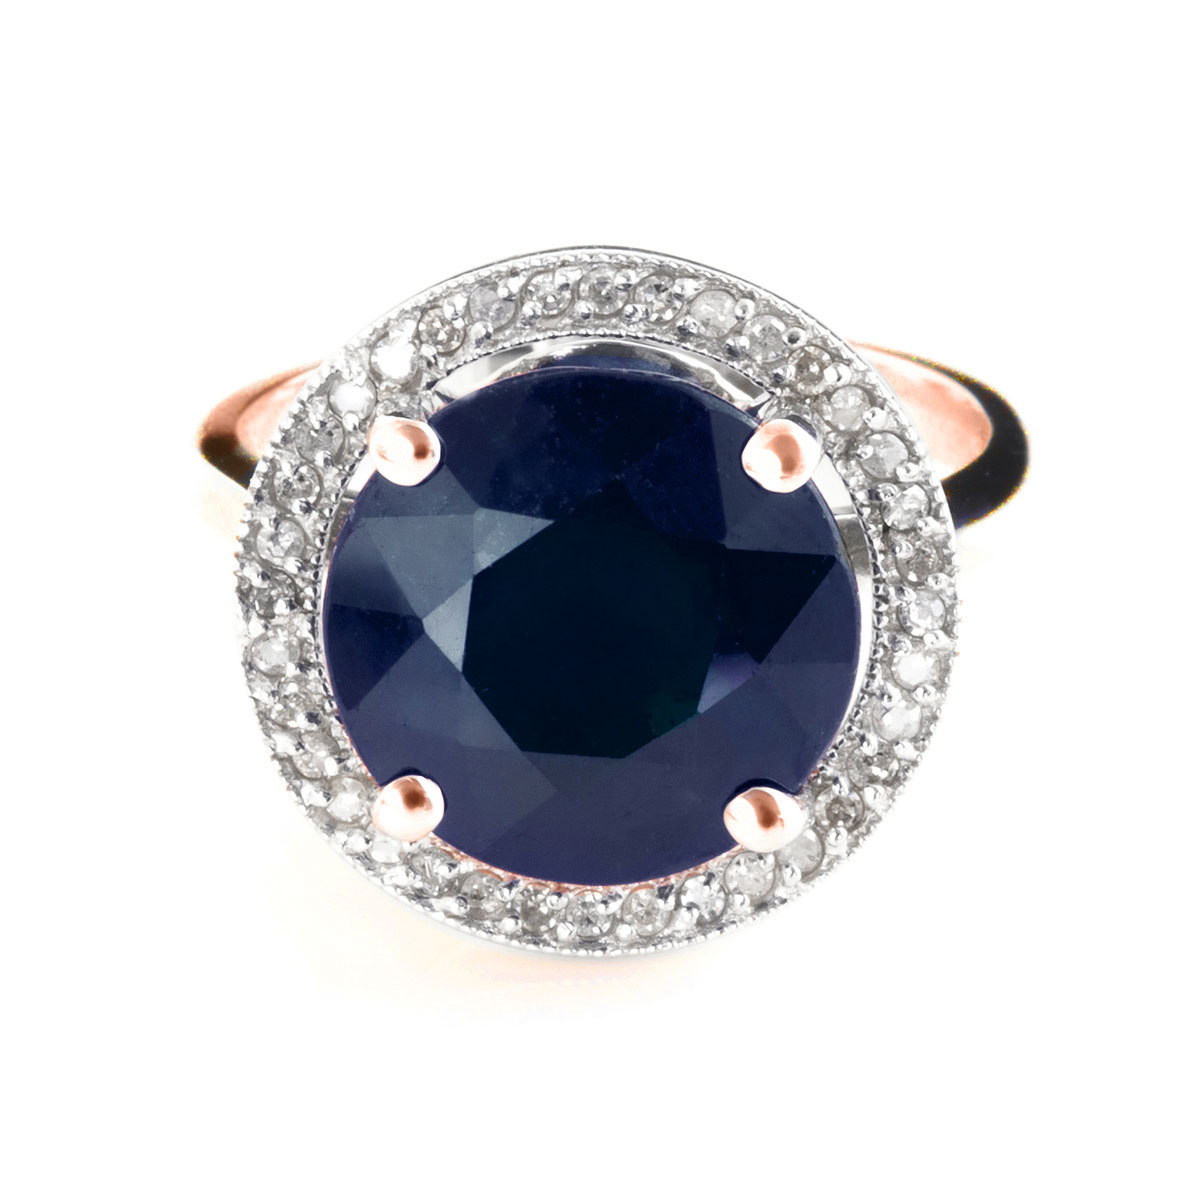 Sapphire & Diamond Halo Ring in 9ct Rose Gold